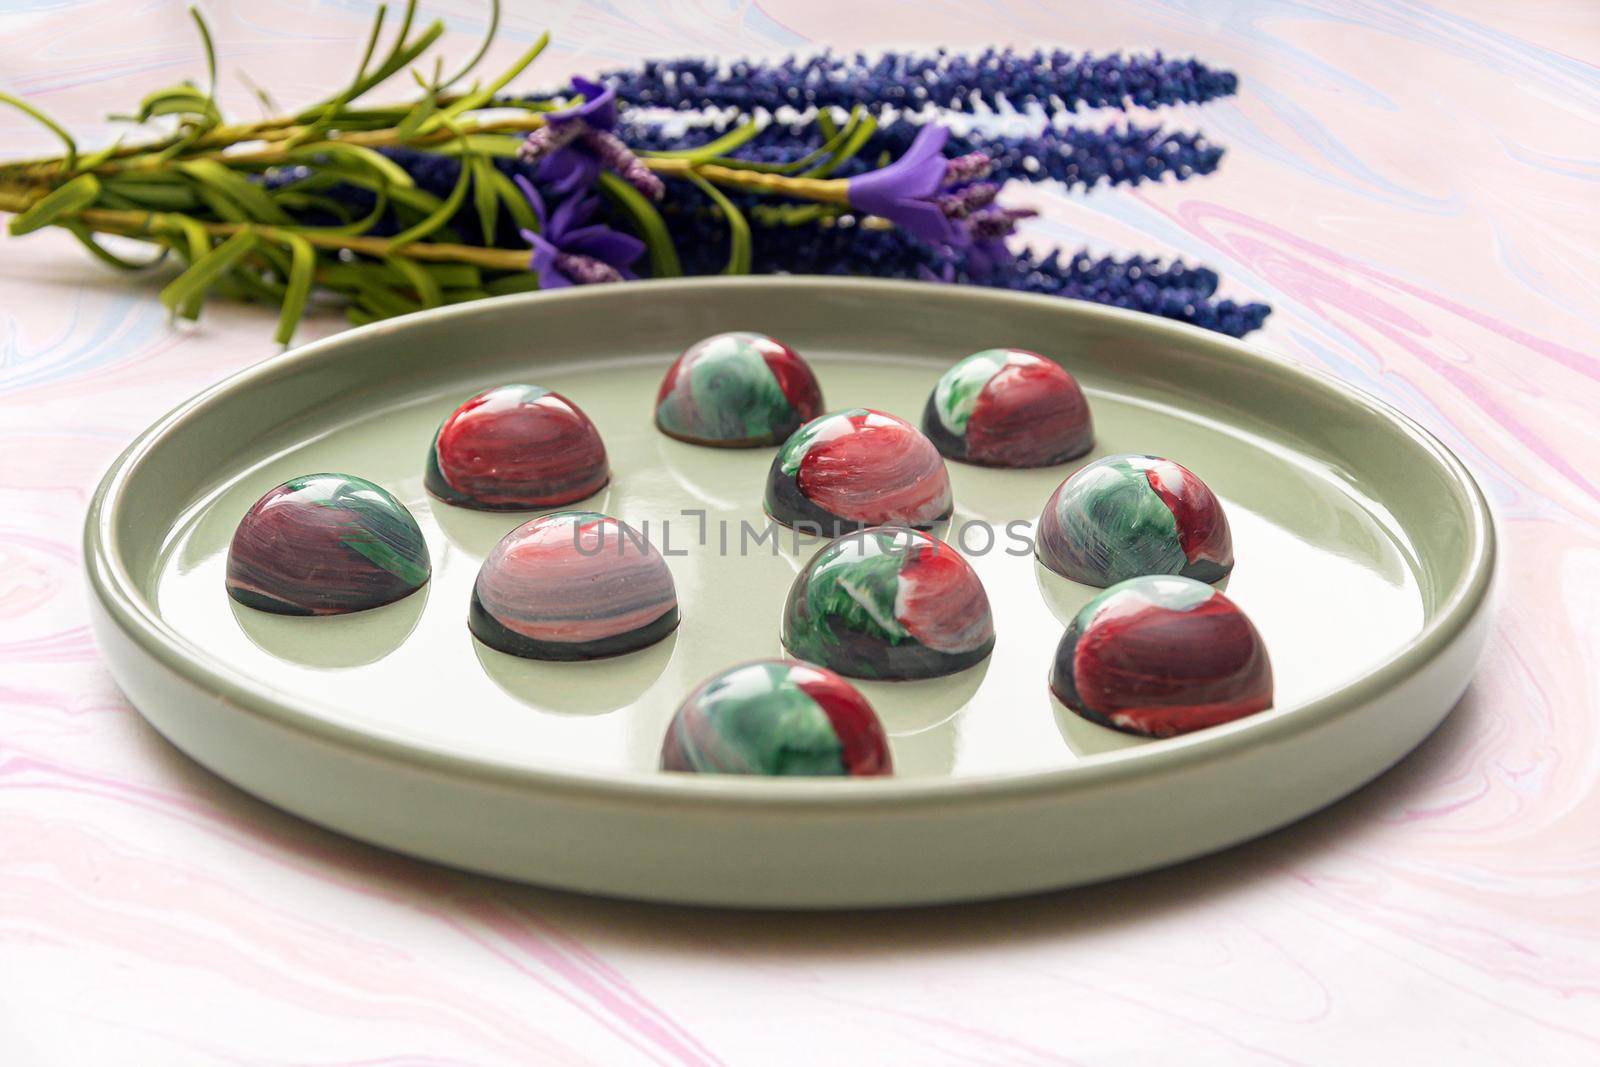 Collectible handmade tempered chocolate candies with a glossy painted body on a round plate with a blurred background and bokeh elements. Stock photography.